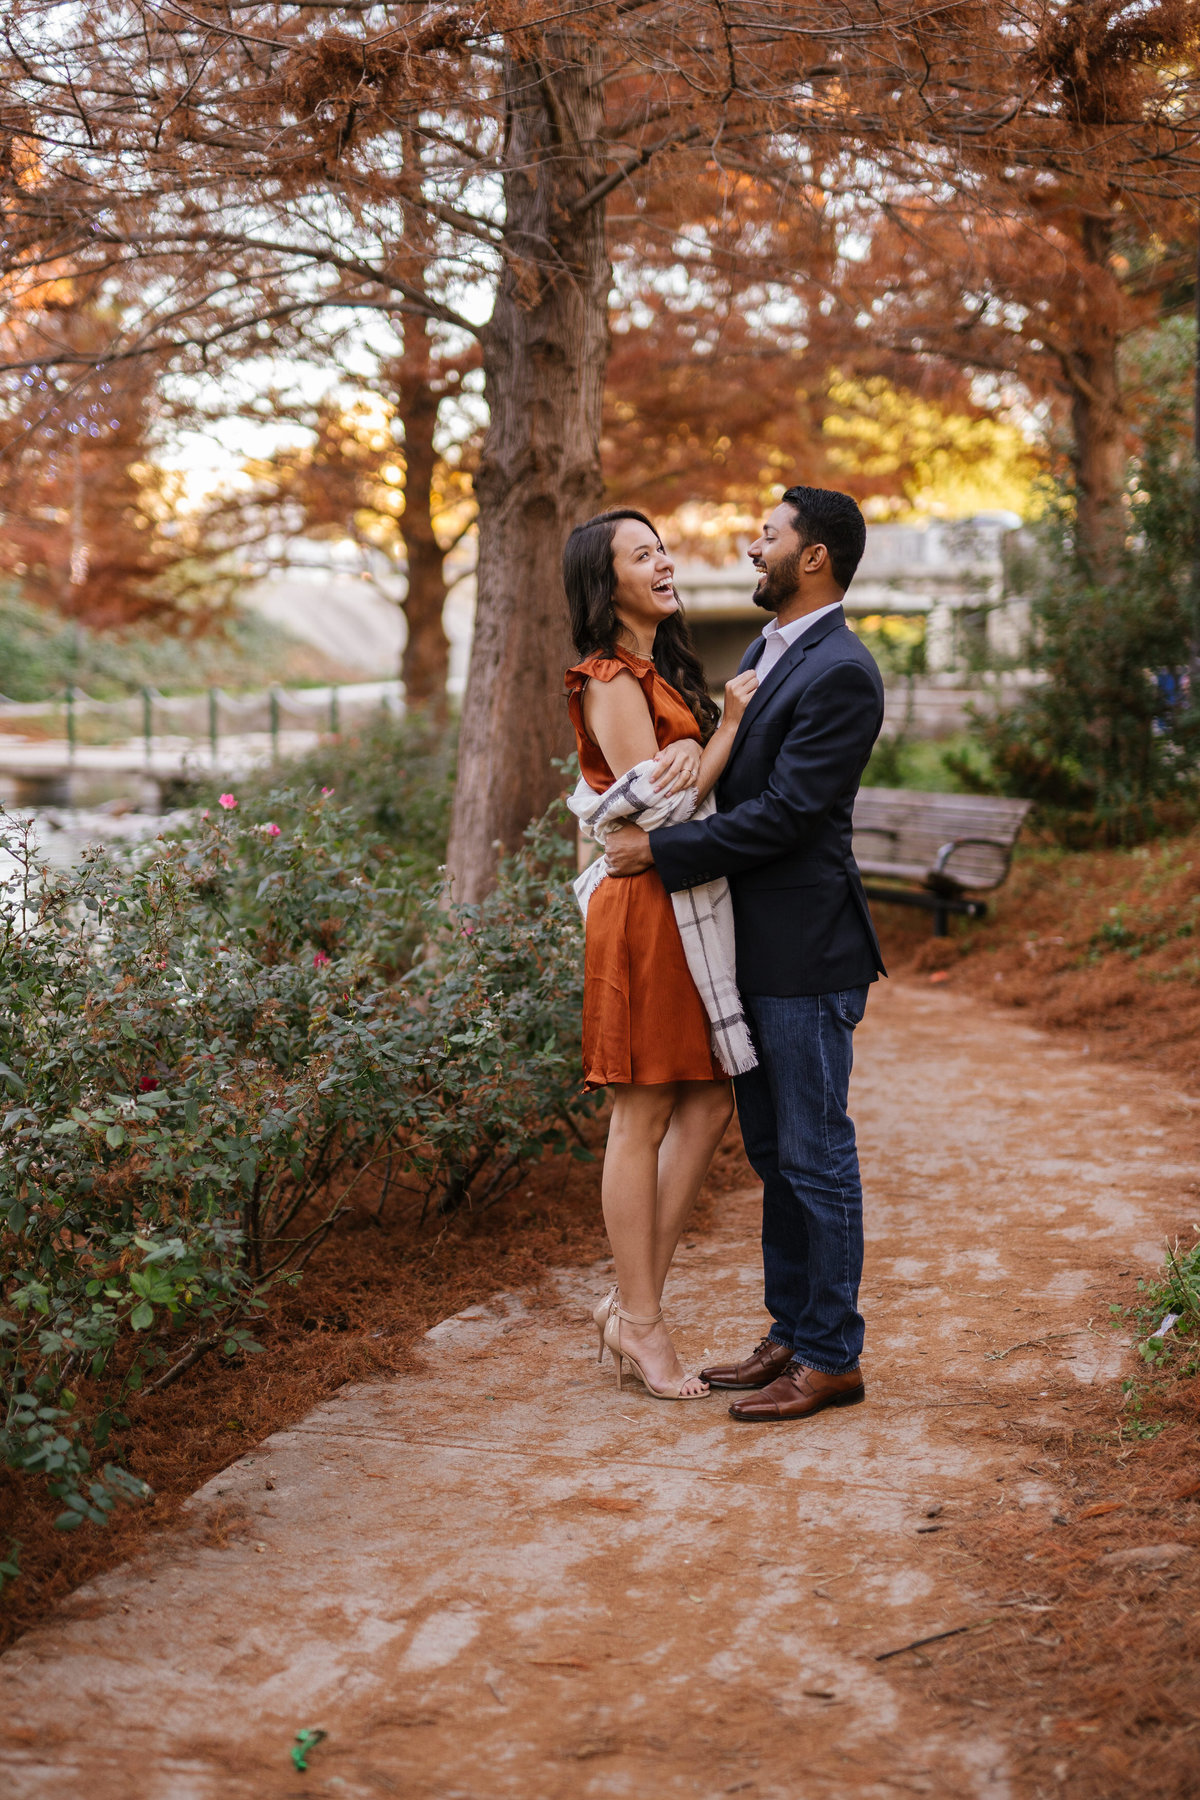 Beautiful fall engagement session for couple with leaves on the ground and standing next to a river.